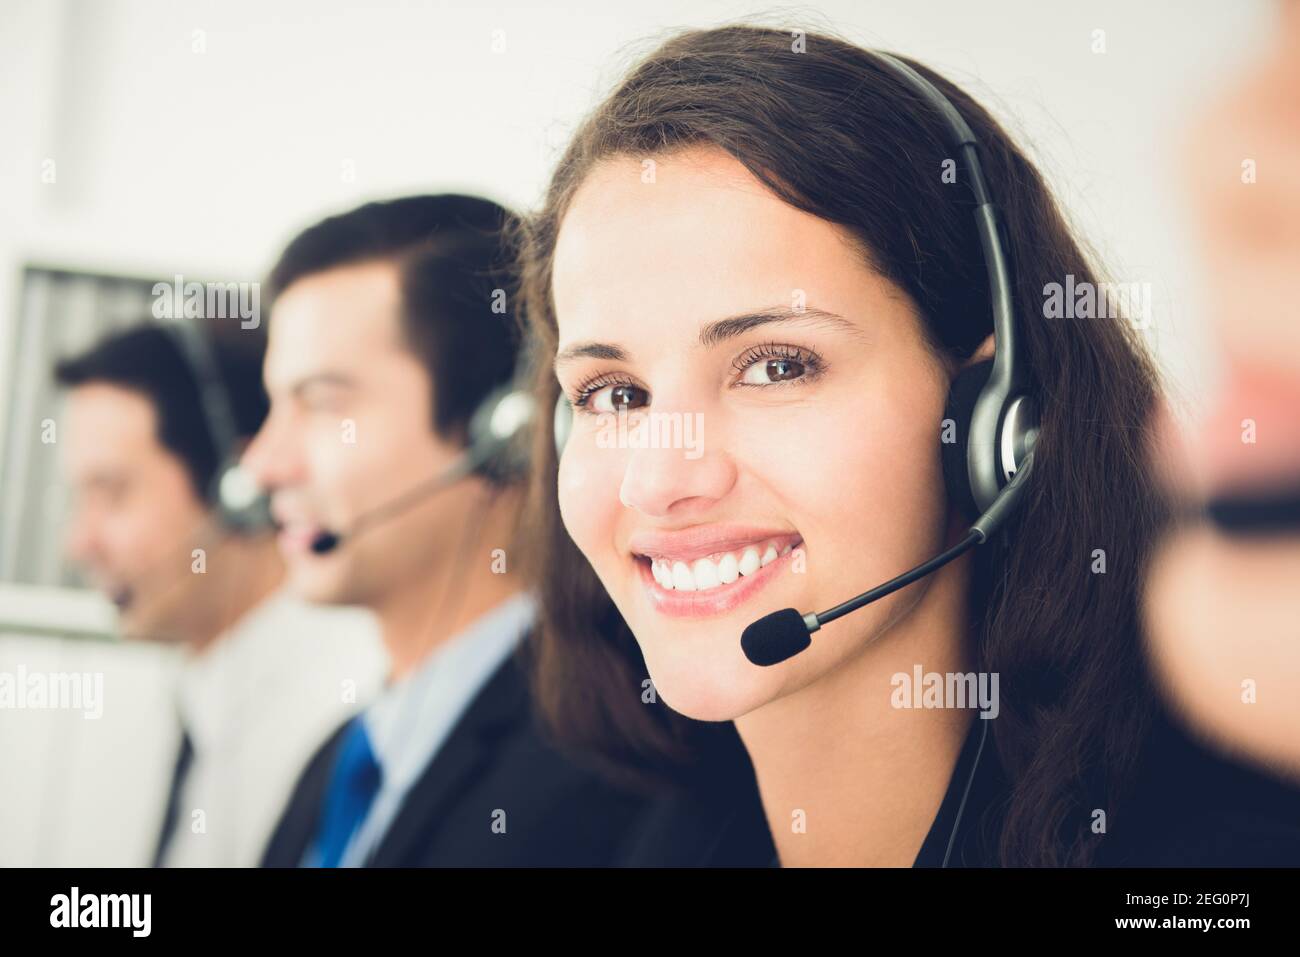 Beautiful smiling woman working in call center as an operator or customer service staff Stock Photo